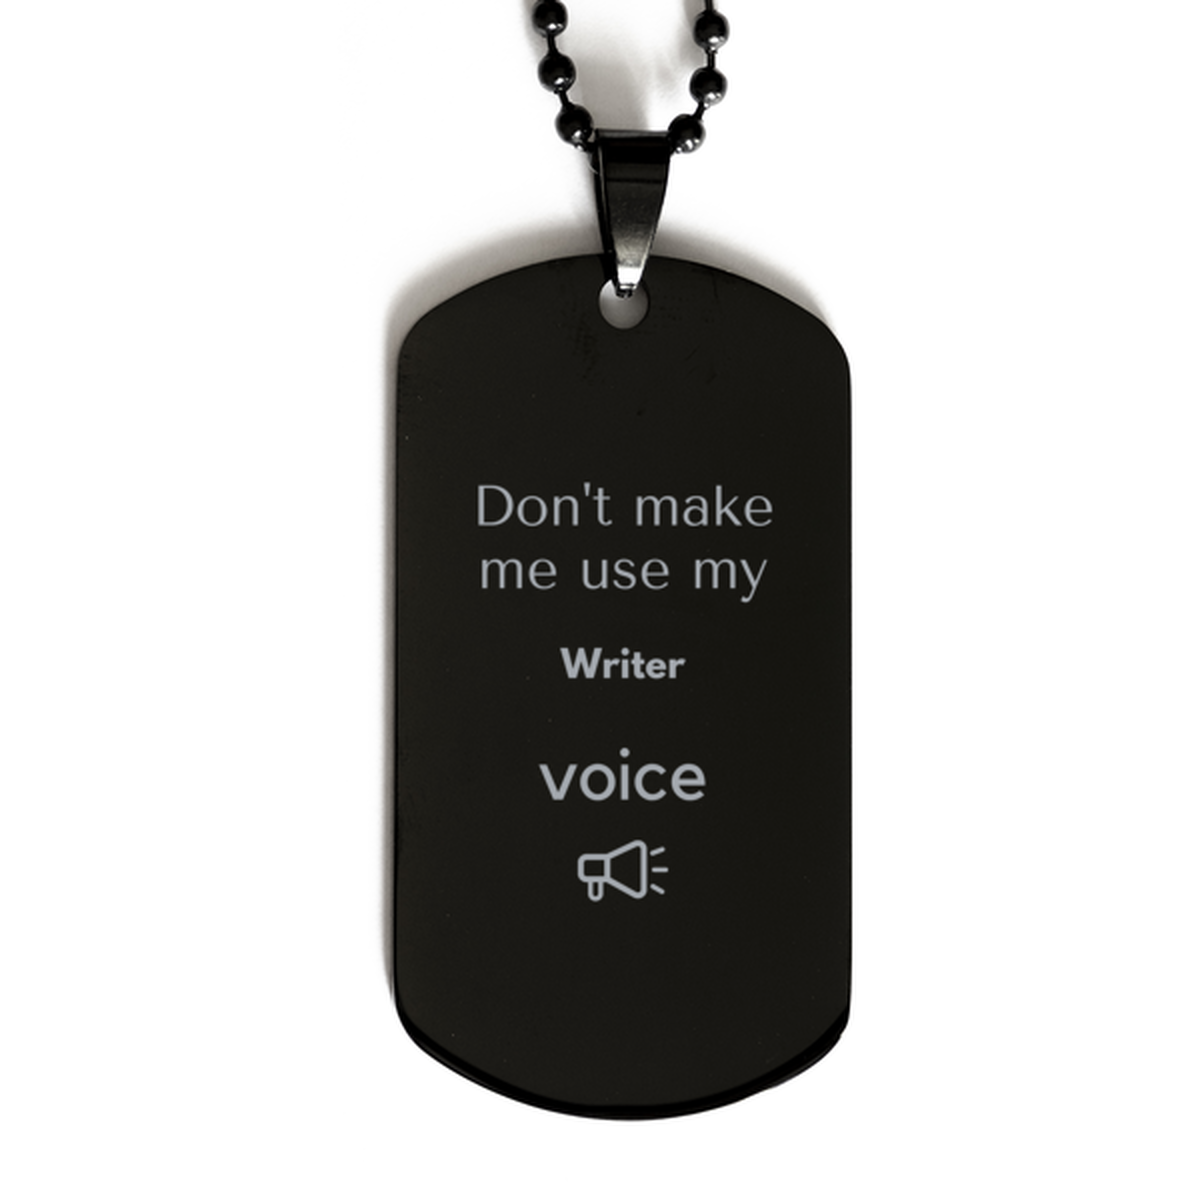 Don't make me use my Writer voice, Sarcasm Writer Gifts, Christmas Writer Black Dog Tag Birthday Unique Gifts For Writer Coworkers, Men, Women, Colleague, Friends